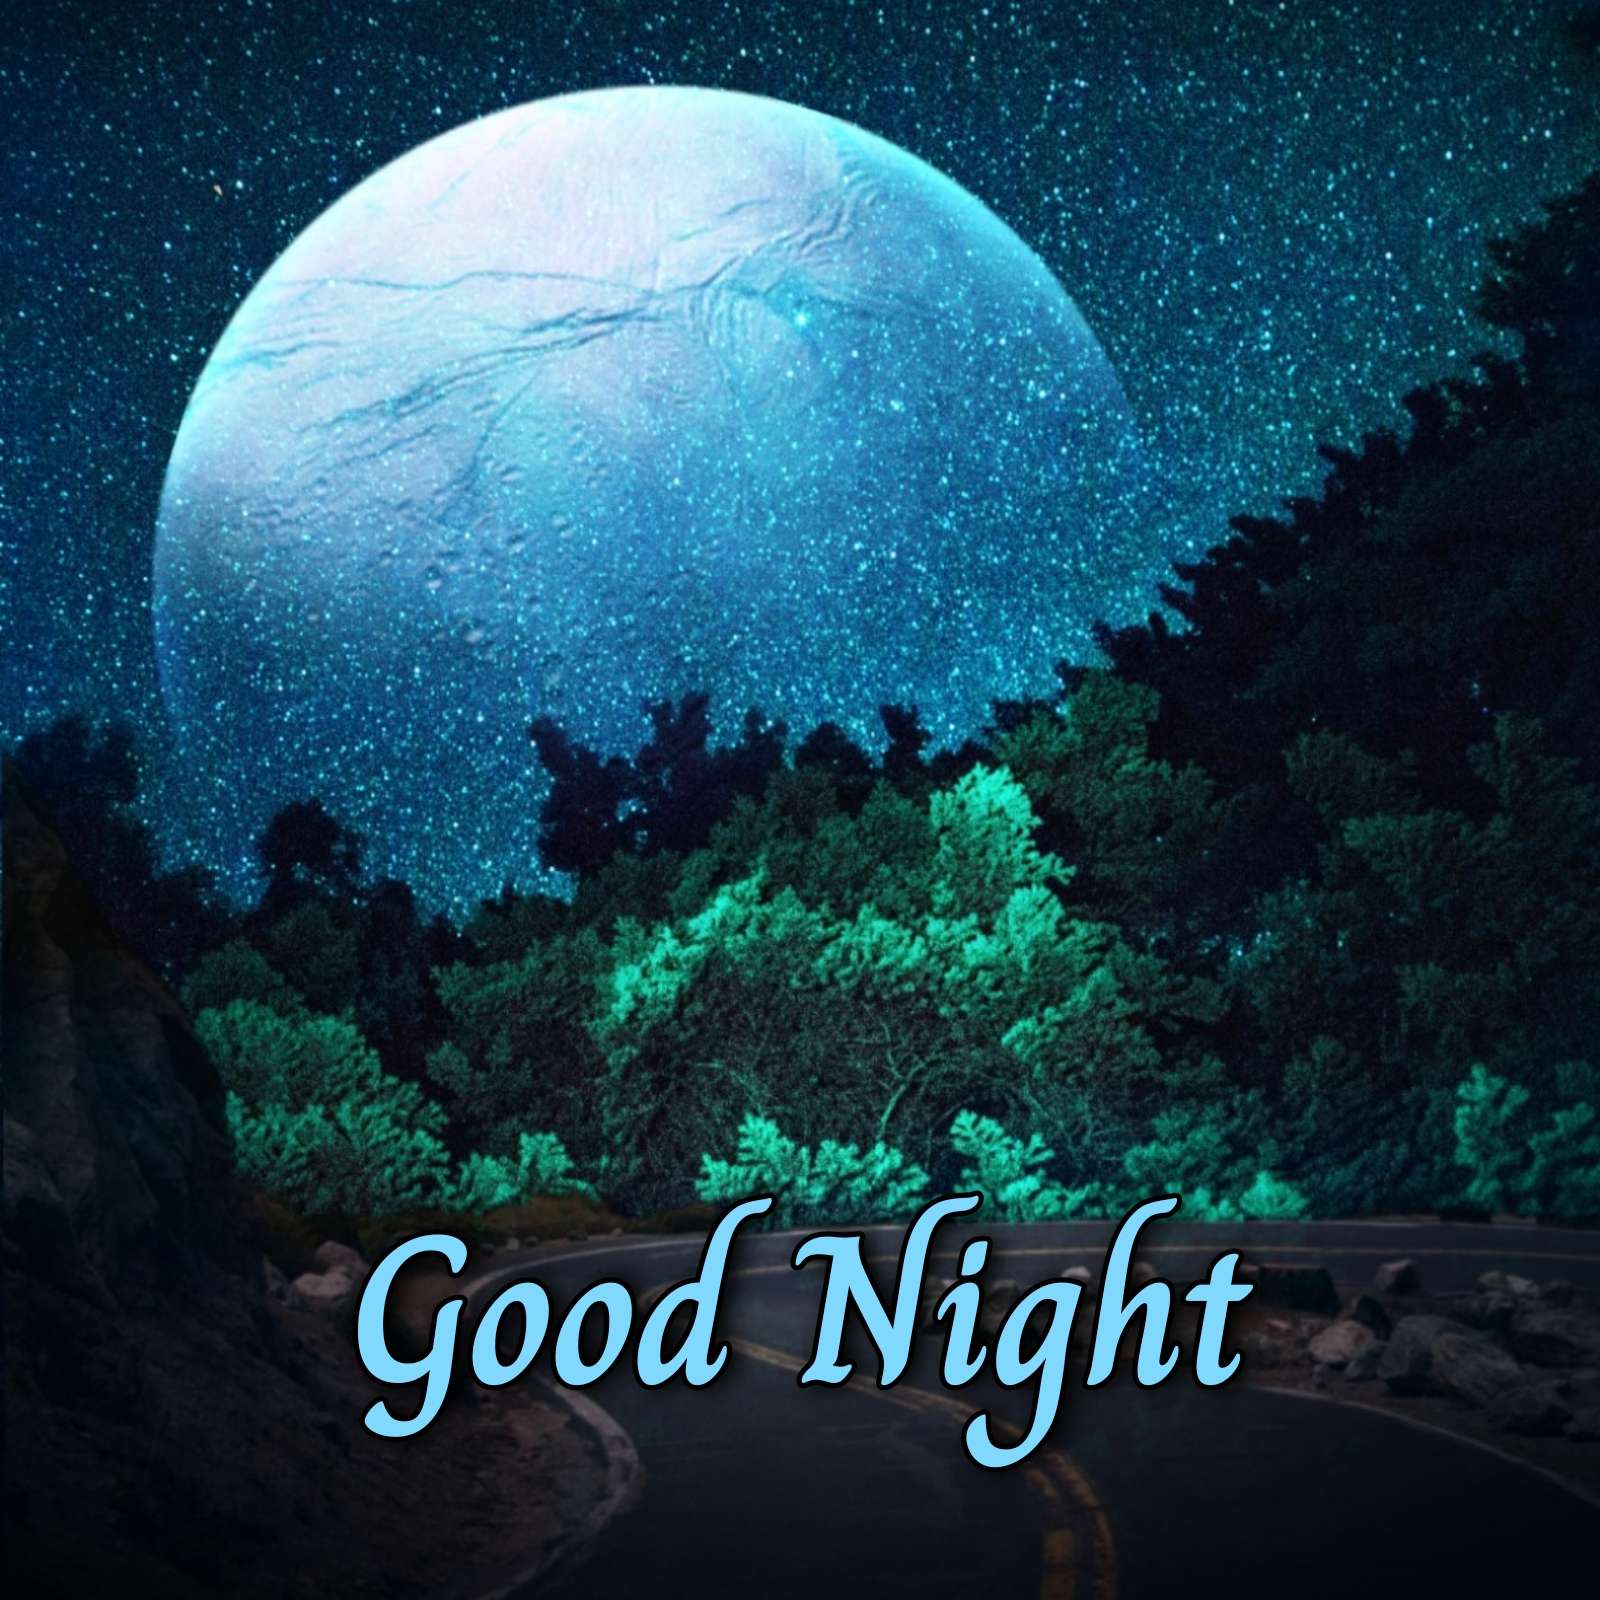 Images Of Good Night